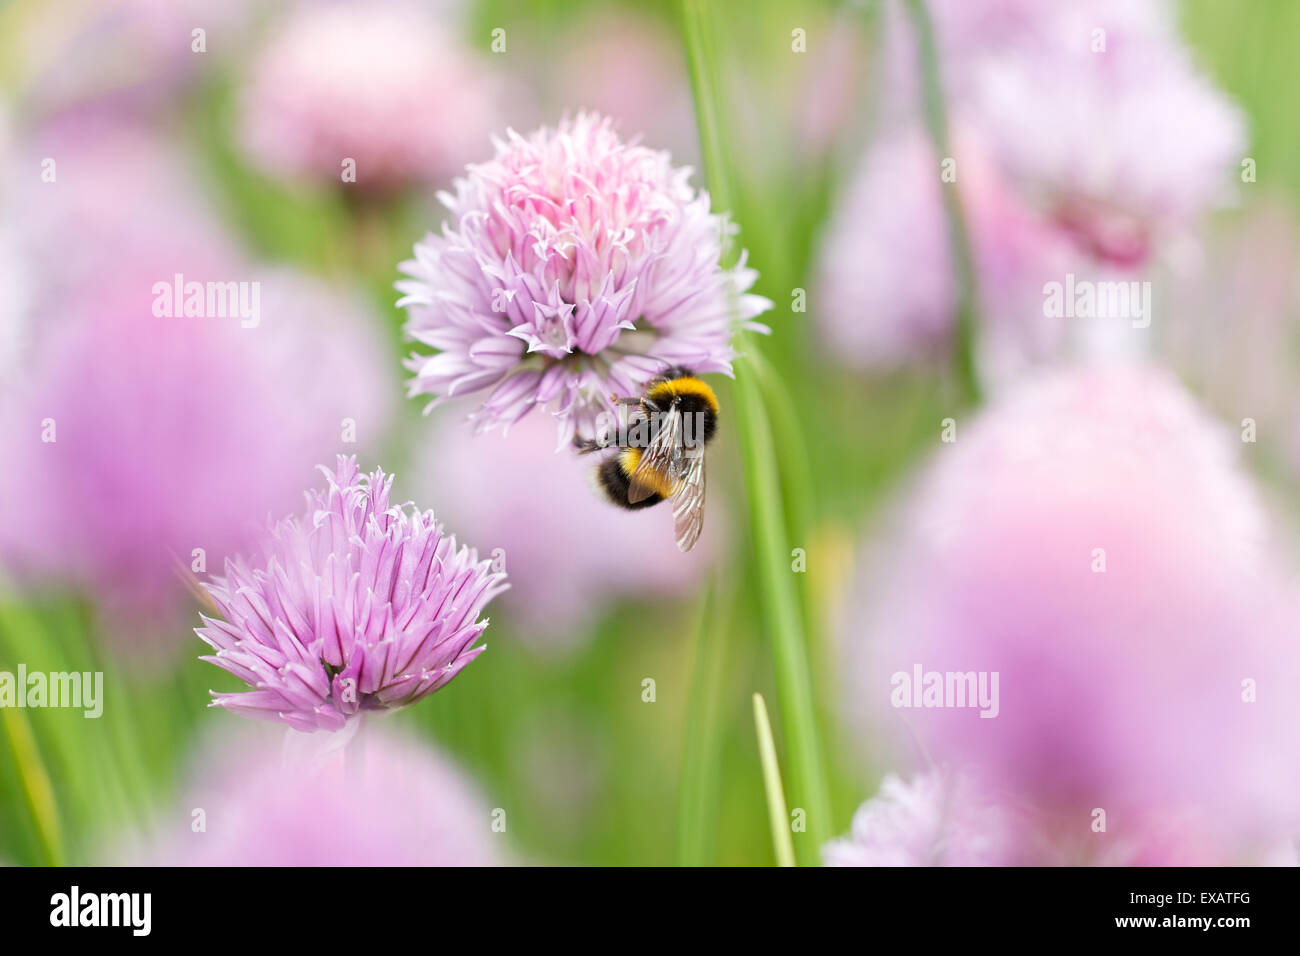 A bumblebee on a chive flower head Stock Photo